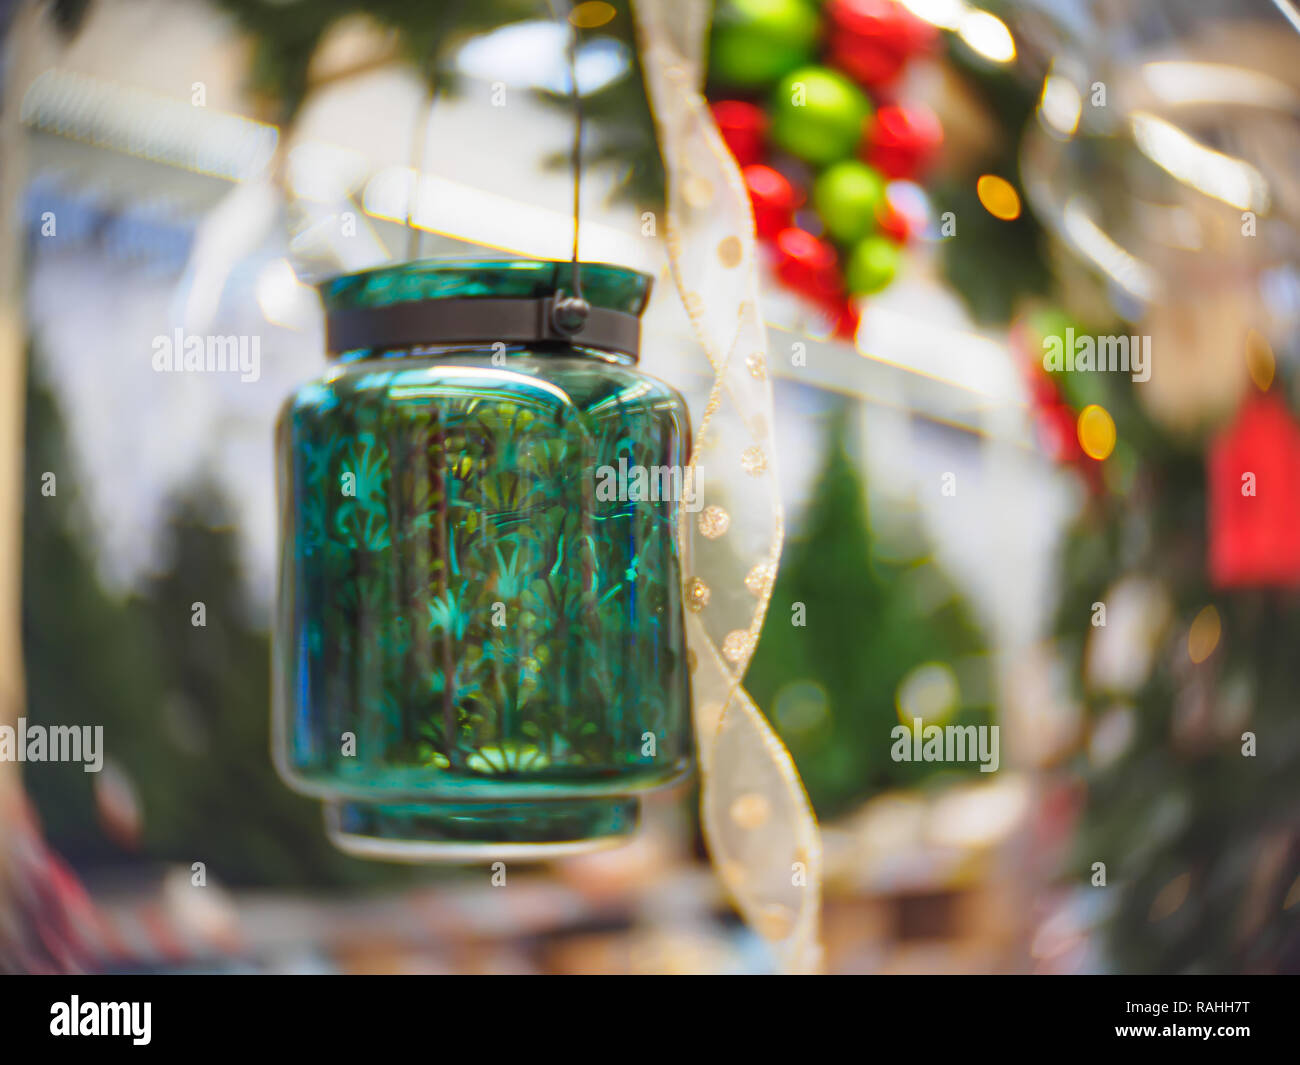 Christmas and New Year festive soft-focused background with fish-eye effect applied. Stock Photo